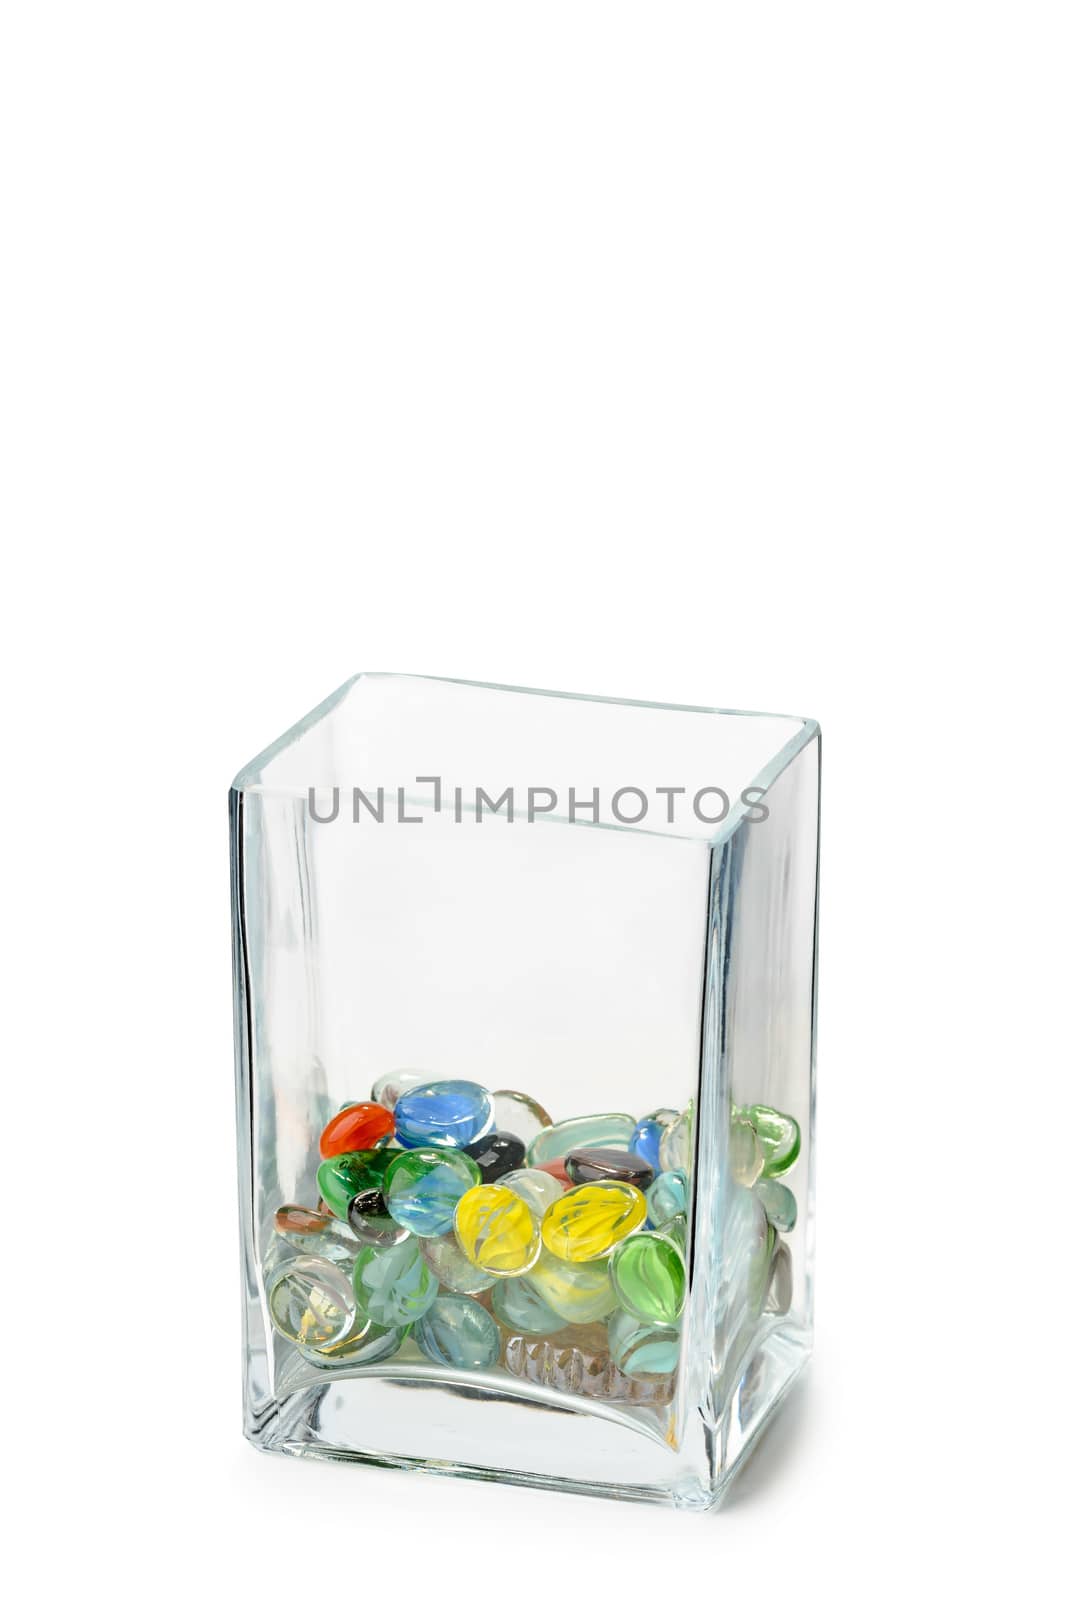 Parallelepipedic Crystal Vase Full of Glass Beads by MaxalTamor